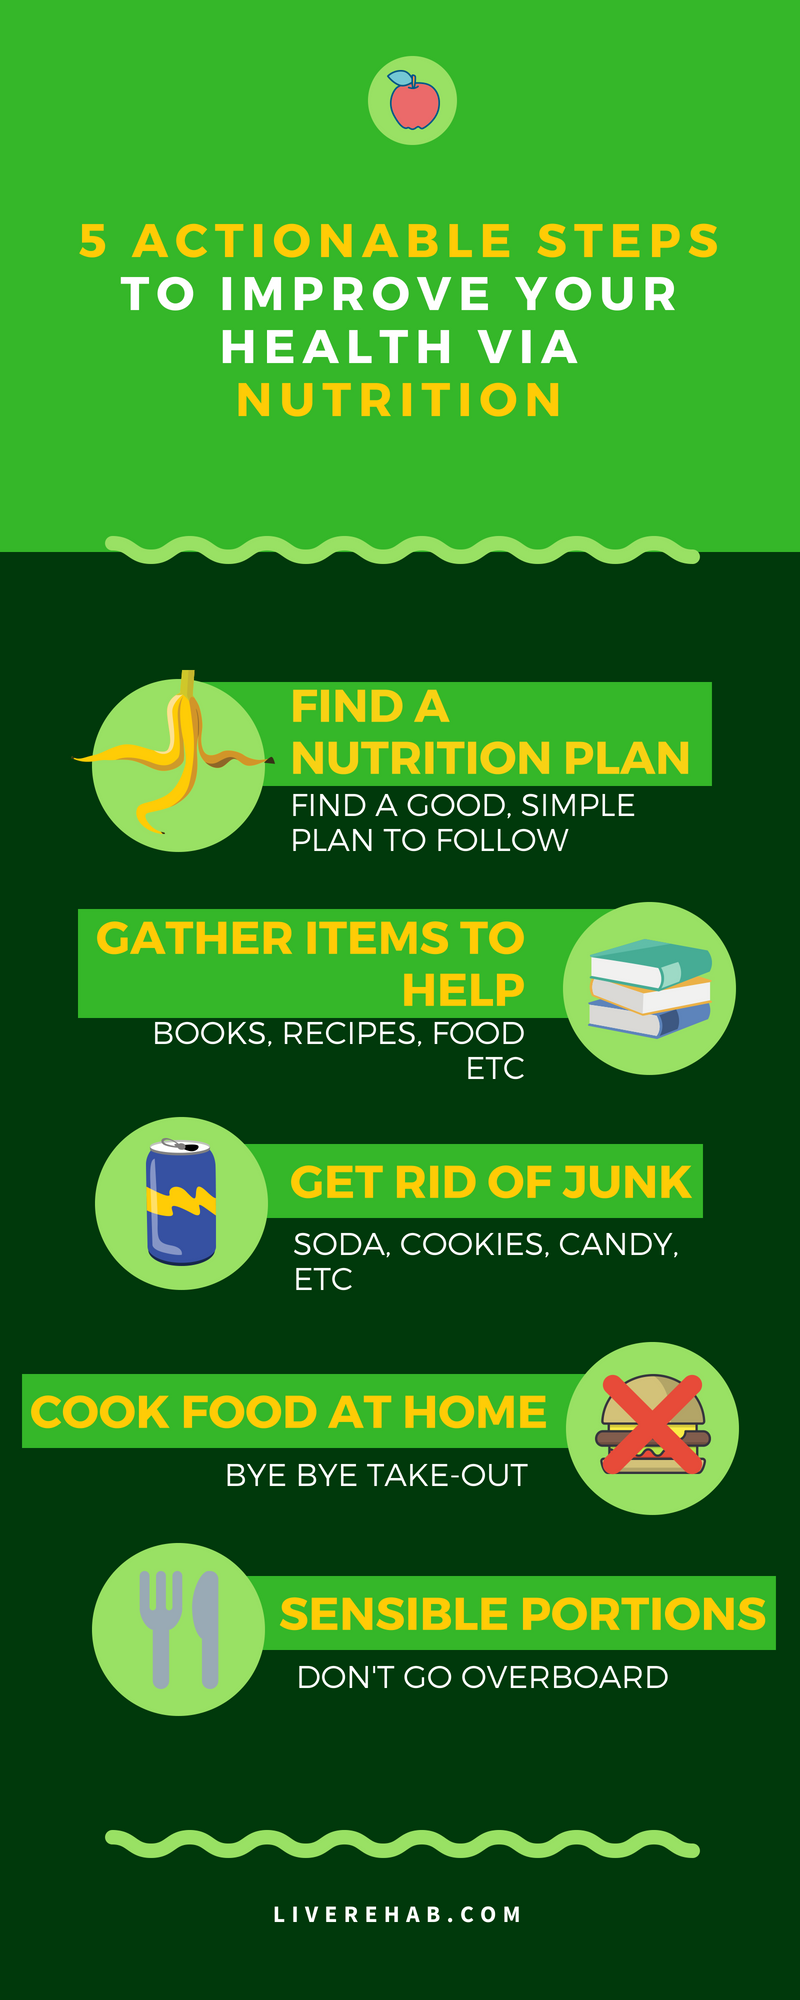 Actionable Steps to Improve Nutrition